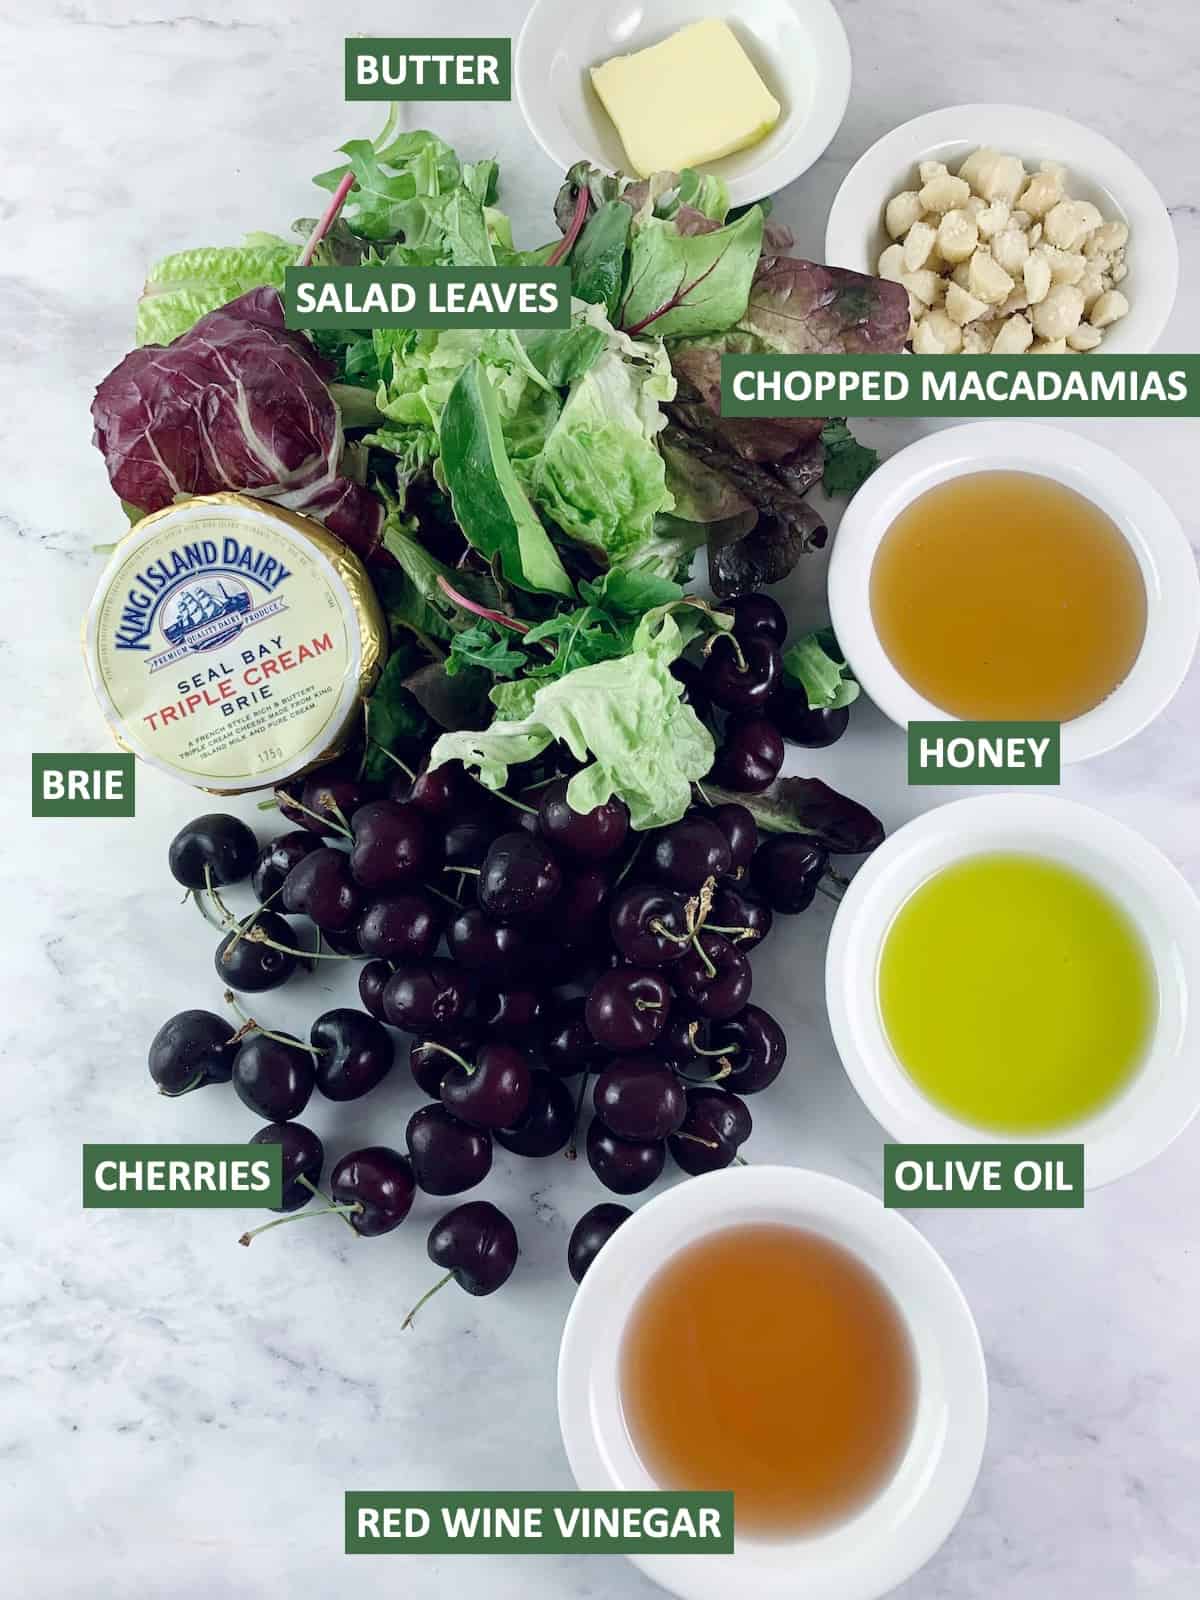 Labelled ingredients needed to make brie salad with cherries.